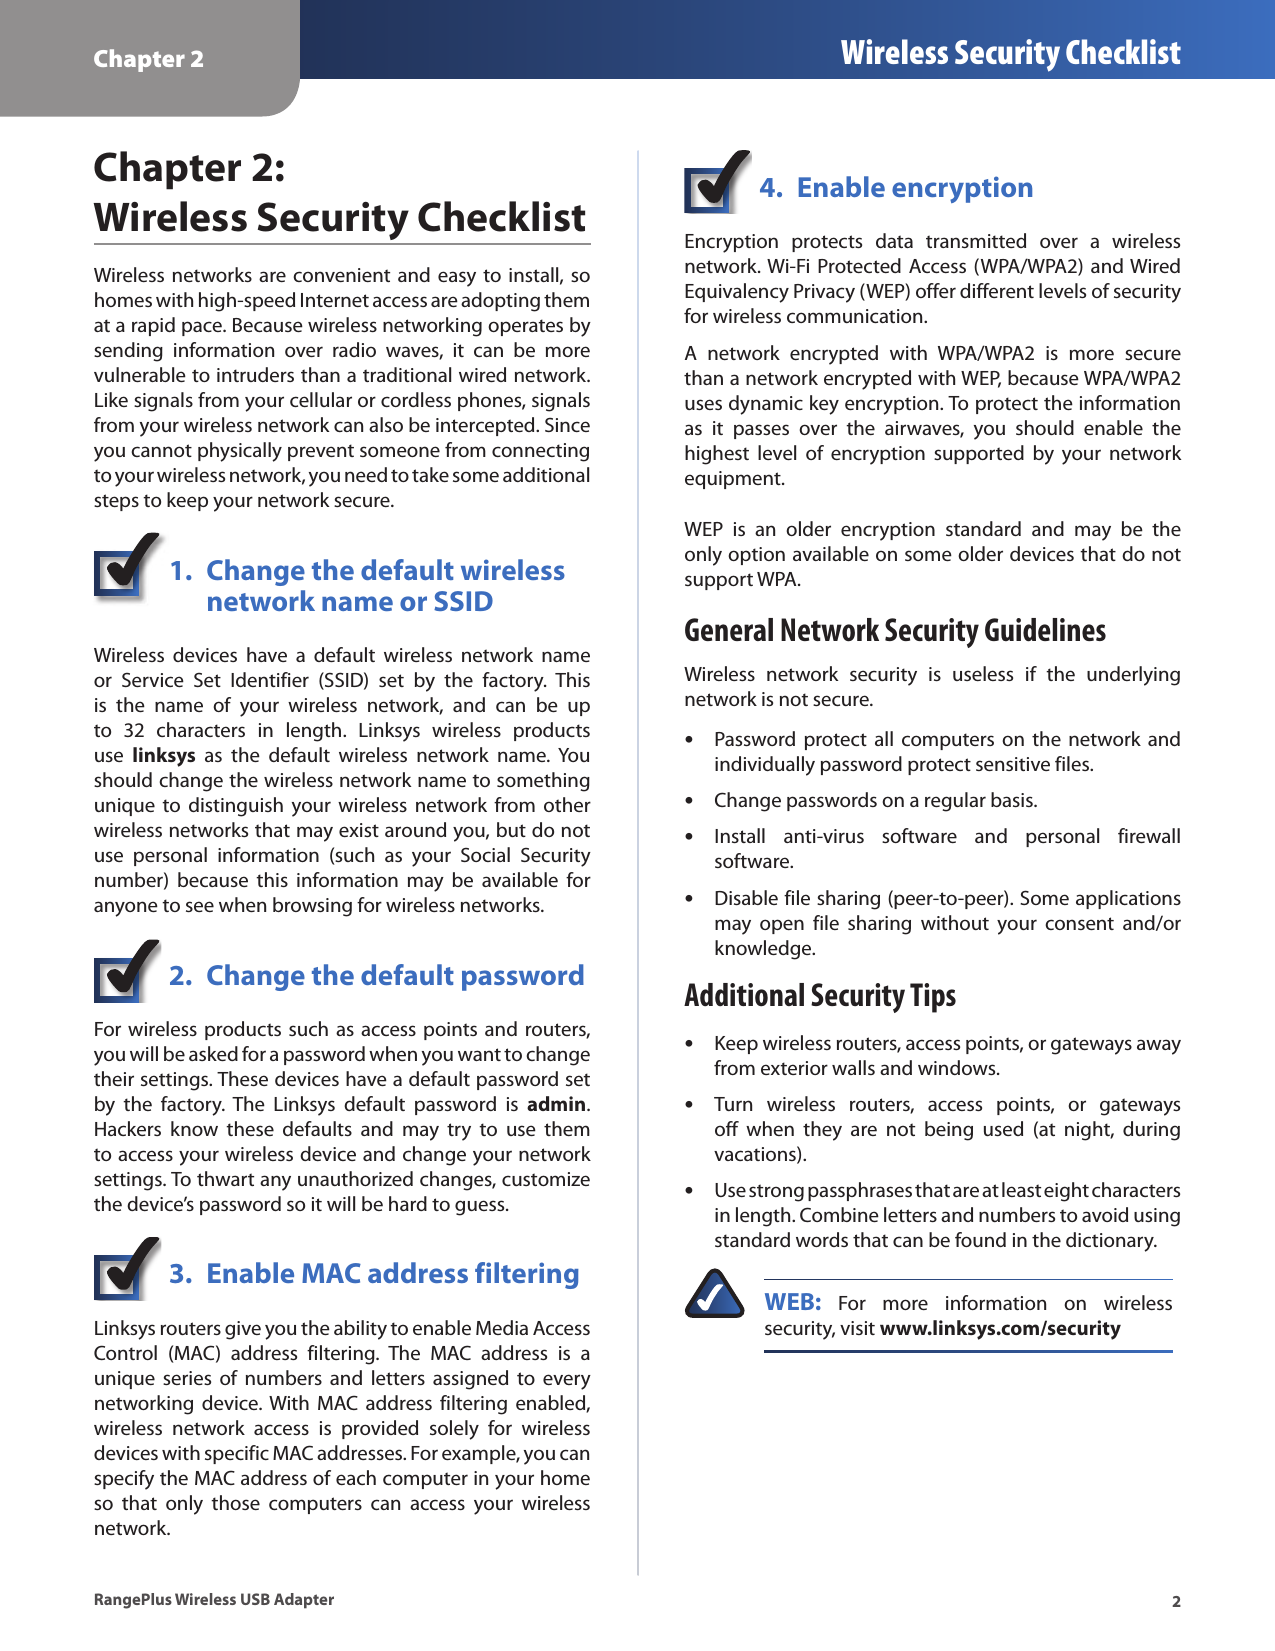 Chapter 2 Wireless Security Checklist2RangePlus Wireless USB AdapterChapter 2:  Wireless Security ChecklistWireless  networks are convenient and  easy  to install, so homes with high-speed Internet access are adopting them at a rapid pace. Because wireless networking operates by sending  information  over  radio  waves,  it  can  be  more vulnerable to intruders than a traditional wired network. Like signals from your cellular or cordless phones, signals from your wireless network can also be intercepted. Since you cannot physically prevent someone from connecting to your wireless network, you need to take some additional steps to keep your network secure. 1.  Change the default wireless    network name or SSIDWireless  devices  have  a  default  wireless  network  name or  Service  Set  Identifier  (SSID)  set  by  the  factory.  This is  the  name  of  your  wireless  network,  and  can  be  up to  32  characters  in  length.  Linksys  wireless  products use  linksys  as  the  default  wireless  network  name.  You should change the wireless network name to something unique  to distinguish  your wireless  network from  other wireless networks that may exist around you, but do not use  personal  information  (such  as  your  Social  Security number)  because  this  information  may  be  available  for anyone to see when browsing for wireless networks. 2.  Change the default passwordFor wireless products such as access points and routers, you will be asked for a password when you want to change their settings. These devices have a default password set by  the  factory.  The  Linksys  default  password  is  admin. Hackers  know  these  defaults  and  may  try  to  use  them to access your wireless device and change your network settings. To thwart any unauthorized changes, customize the device’s password so it will be hard to guess.3.  Enable MAC address filteringLinksys routers give you the ability to enable Media Access Control  (MAC)  address  filtering.  The  MAC  address  is  a unique  series  of  numbers  and  letters  assigned  to every networking  device. With  MAC  address filtering  enabled, wireless  network  access  is  provided  solely  for  wireless devices with specific MAC addresses. For example, you can specify the MAC address of each computer in your home so  that  only  those  computers  can  access  your  wireless network. 4.  Enable encryptionEncryption  protects  data  transmitted  over  a  wireless network. Wi-Fi Protected  Access (WPA/WPA2)  and Wired Equivalency Privacy (WEP) offer different levels of security for wireless communication.A  network  encrypted  with  WPA/WPA2  is  more  secure than a network encrypted with WEP, because WPA/WPA2 uses dynamic key encryption. To protect the information as  it  passes  over  the  airwaves,  you  should  enable  the highest  level  of  encryption  supported  by  your  network equipment. WEP  is  an  older  encryption  standard  and  may  be  the only option available on some older devices that do not support WPA.General Network Security GuidelinesWireless  network  security  is  useless  if  the  underlying network is not secure. Password protect  all computers on  the network  and individually password protect sensitive files.Change passwords on a regular basis.Install  anti-virus  software  and  personal  firewall software.Disable file sharing (peer-to-peer). Some applications may  open  file  sharing  without  your  consent  and/or knowledge.Additional Security TipsKeep wireless routers, access points, or gateways away from exterior walls and windows.Turn  wireless  routers,  access  points,  or  gateways off  when  they  are  not  being  used  (at  night,  during vacations).Use strong passphrases that are at least eight characters in length. Combine letters and numbers to avoid using standard words that can be found in the dictionary. WEB:  For  more  information  on  wireless security, visit www.linksys.com/security•••••••